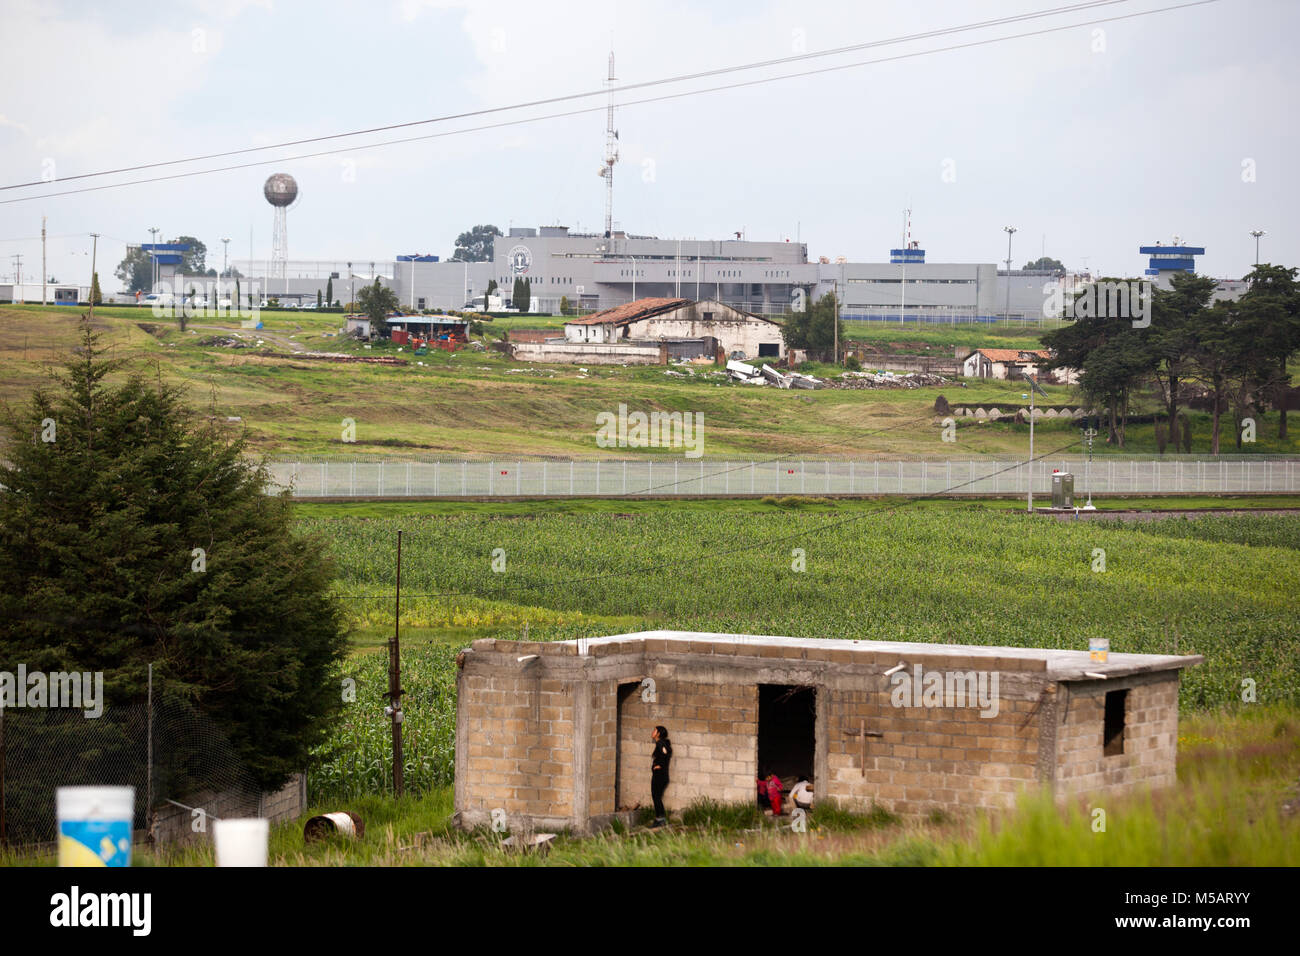 The Altiplano prison from which Joaquin 'El Chapo' Guzman escaped near Toluca, Mexico on Wednesday, July 15, 2015. The notorious cartel leader Joaquin 'El Chapo' Guzman escaped from the maximum security prison four days ago through a tunnel. This is the second time he has escaped a Mexican prison. Stock Photo